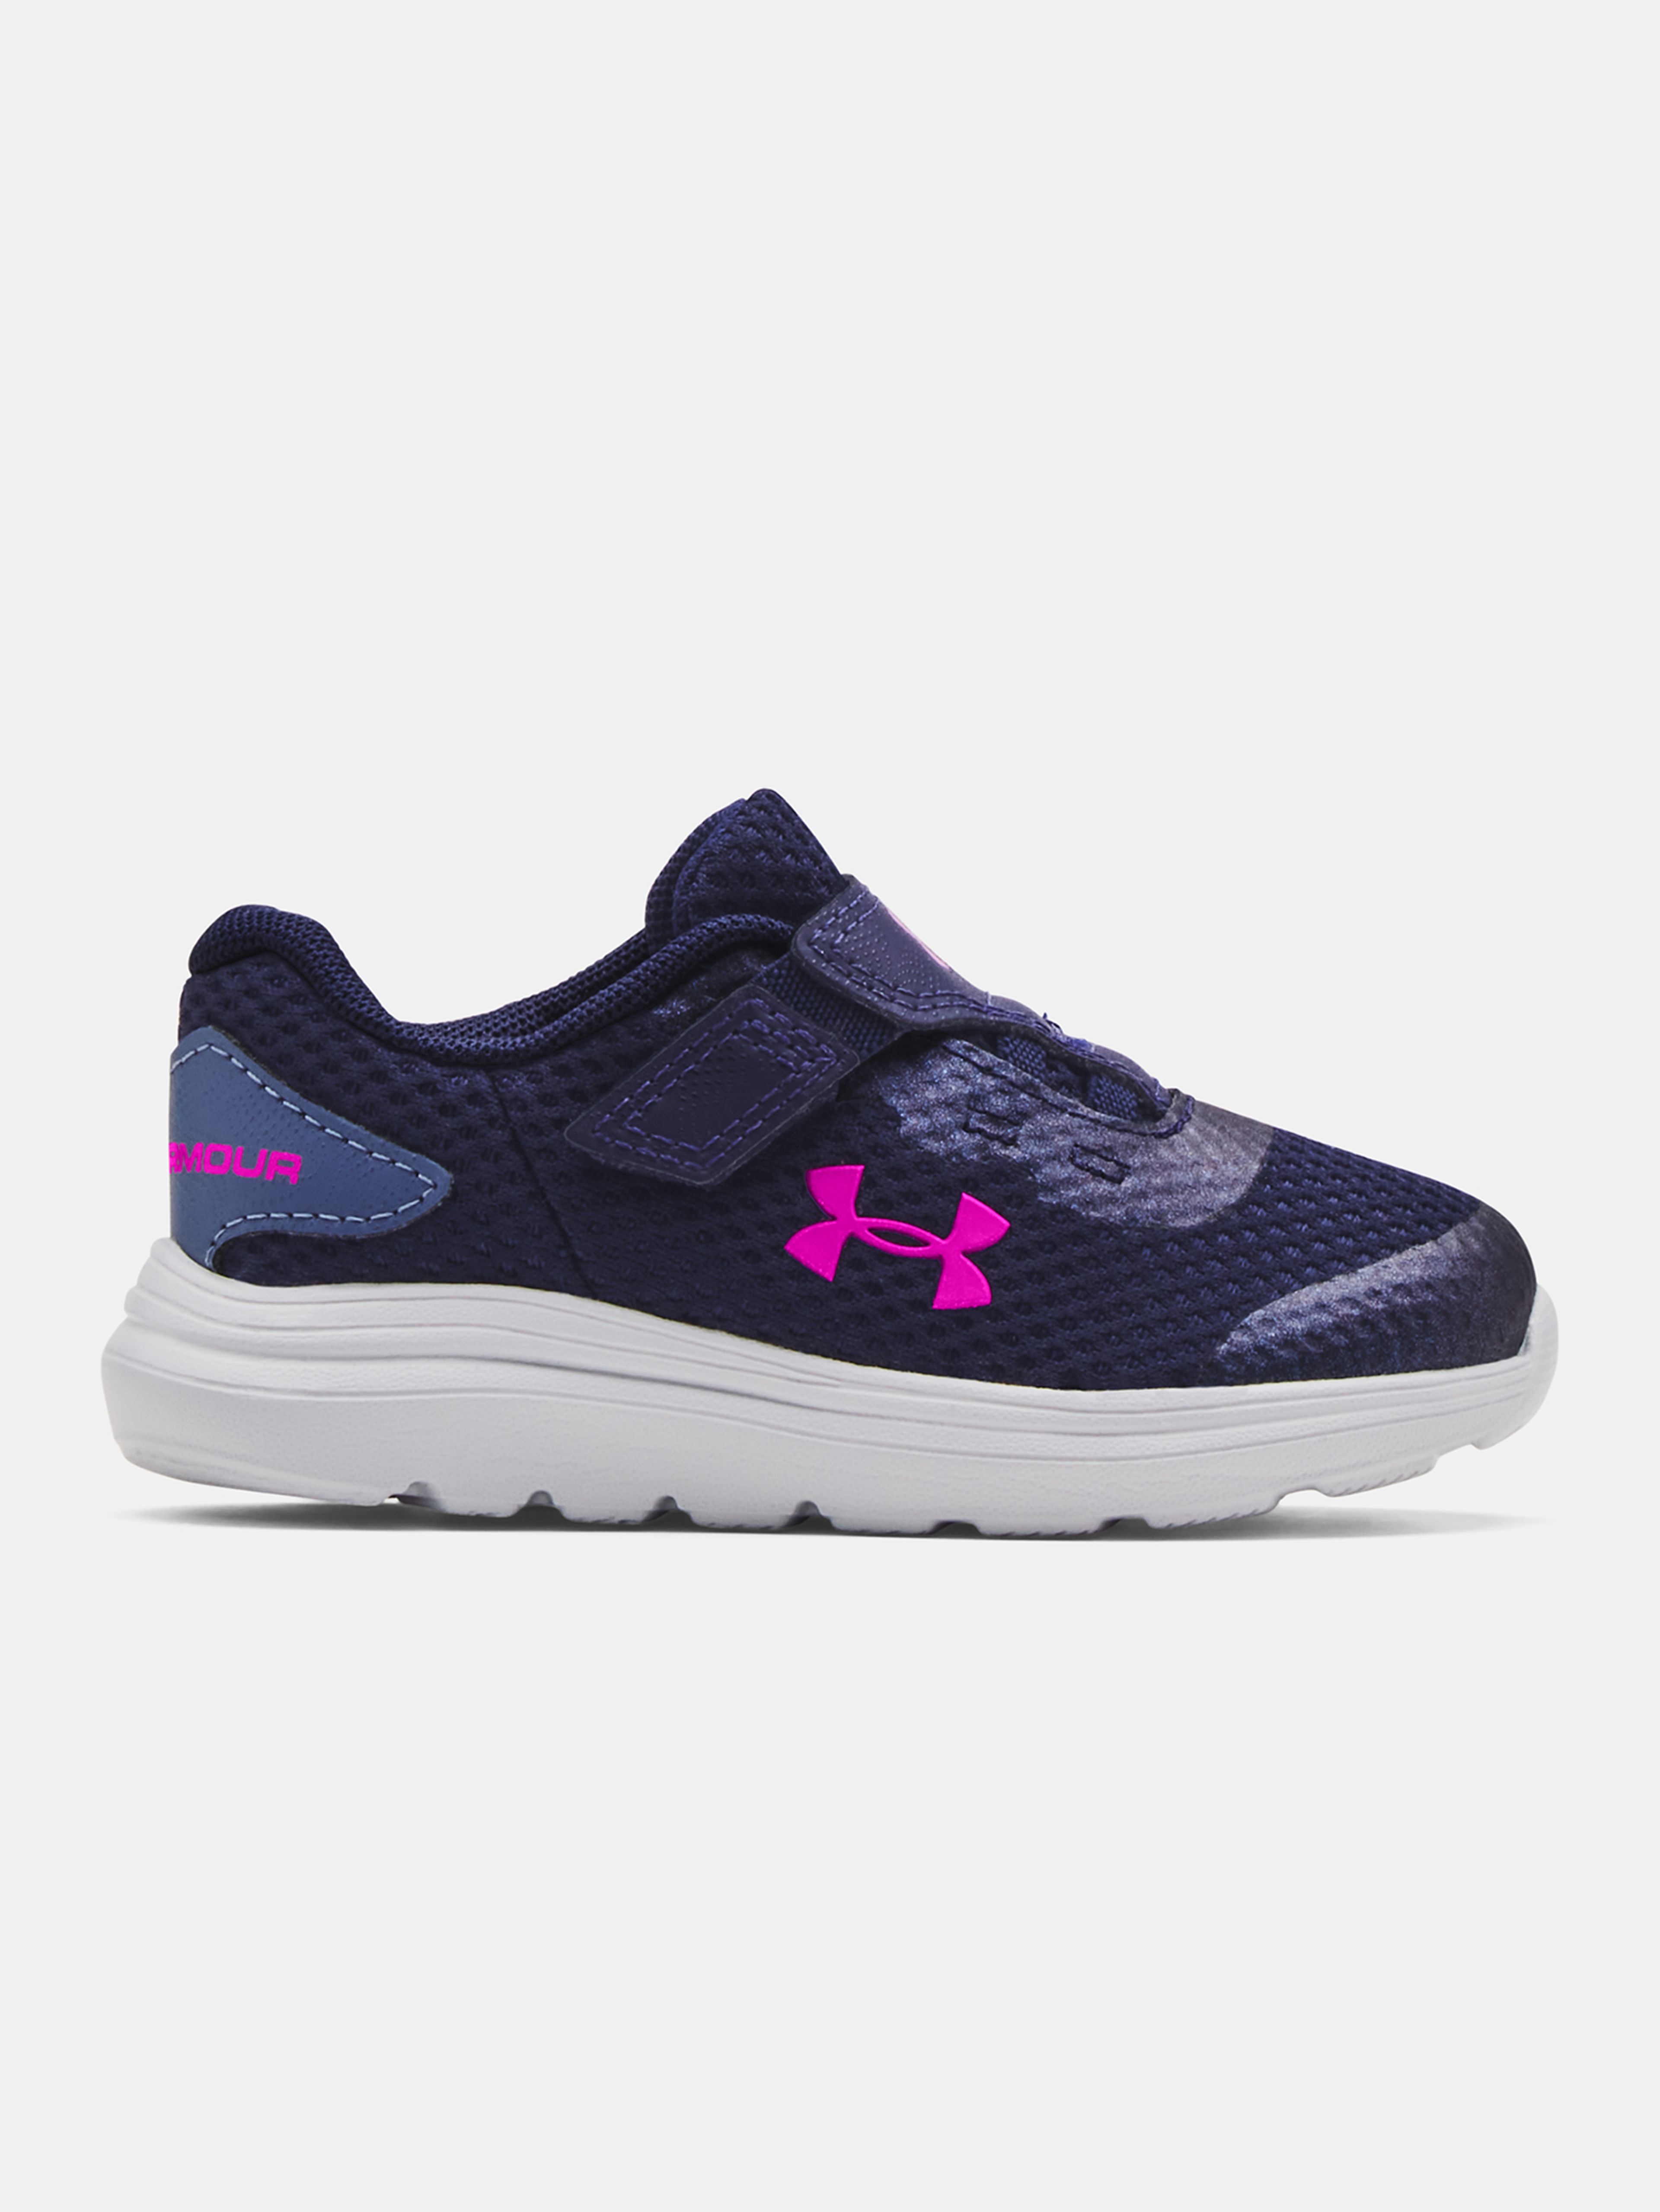 Boty Under Armour Inf Surge 2 AC-NVY